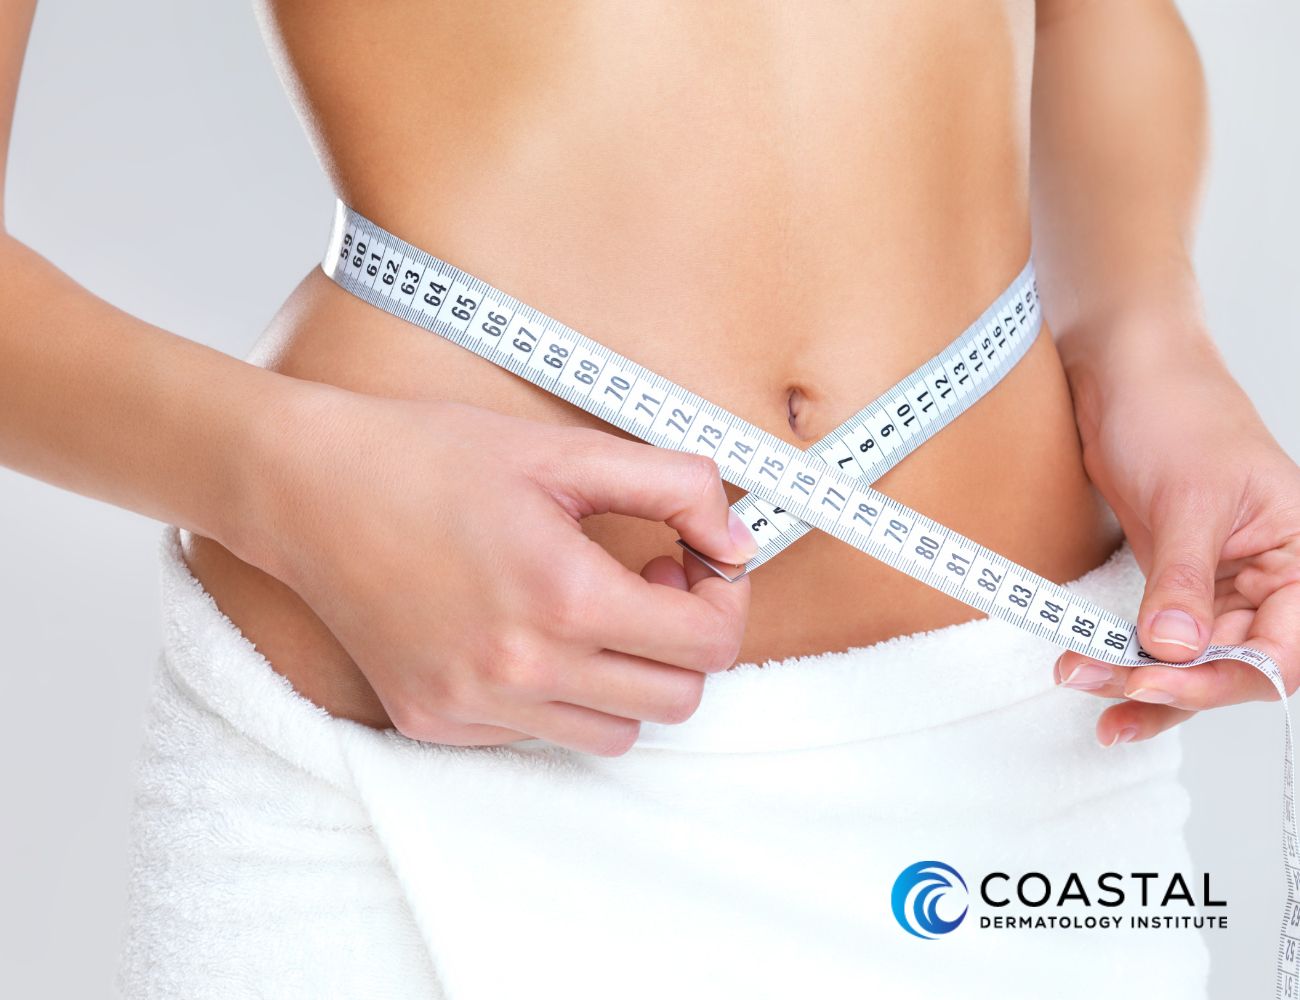 Transform Your Body with Exion: Innovative Non-Invasive Fat Reduction and Skin Tightening